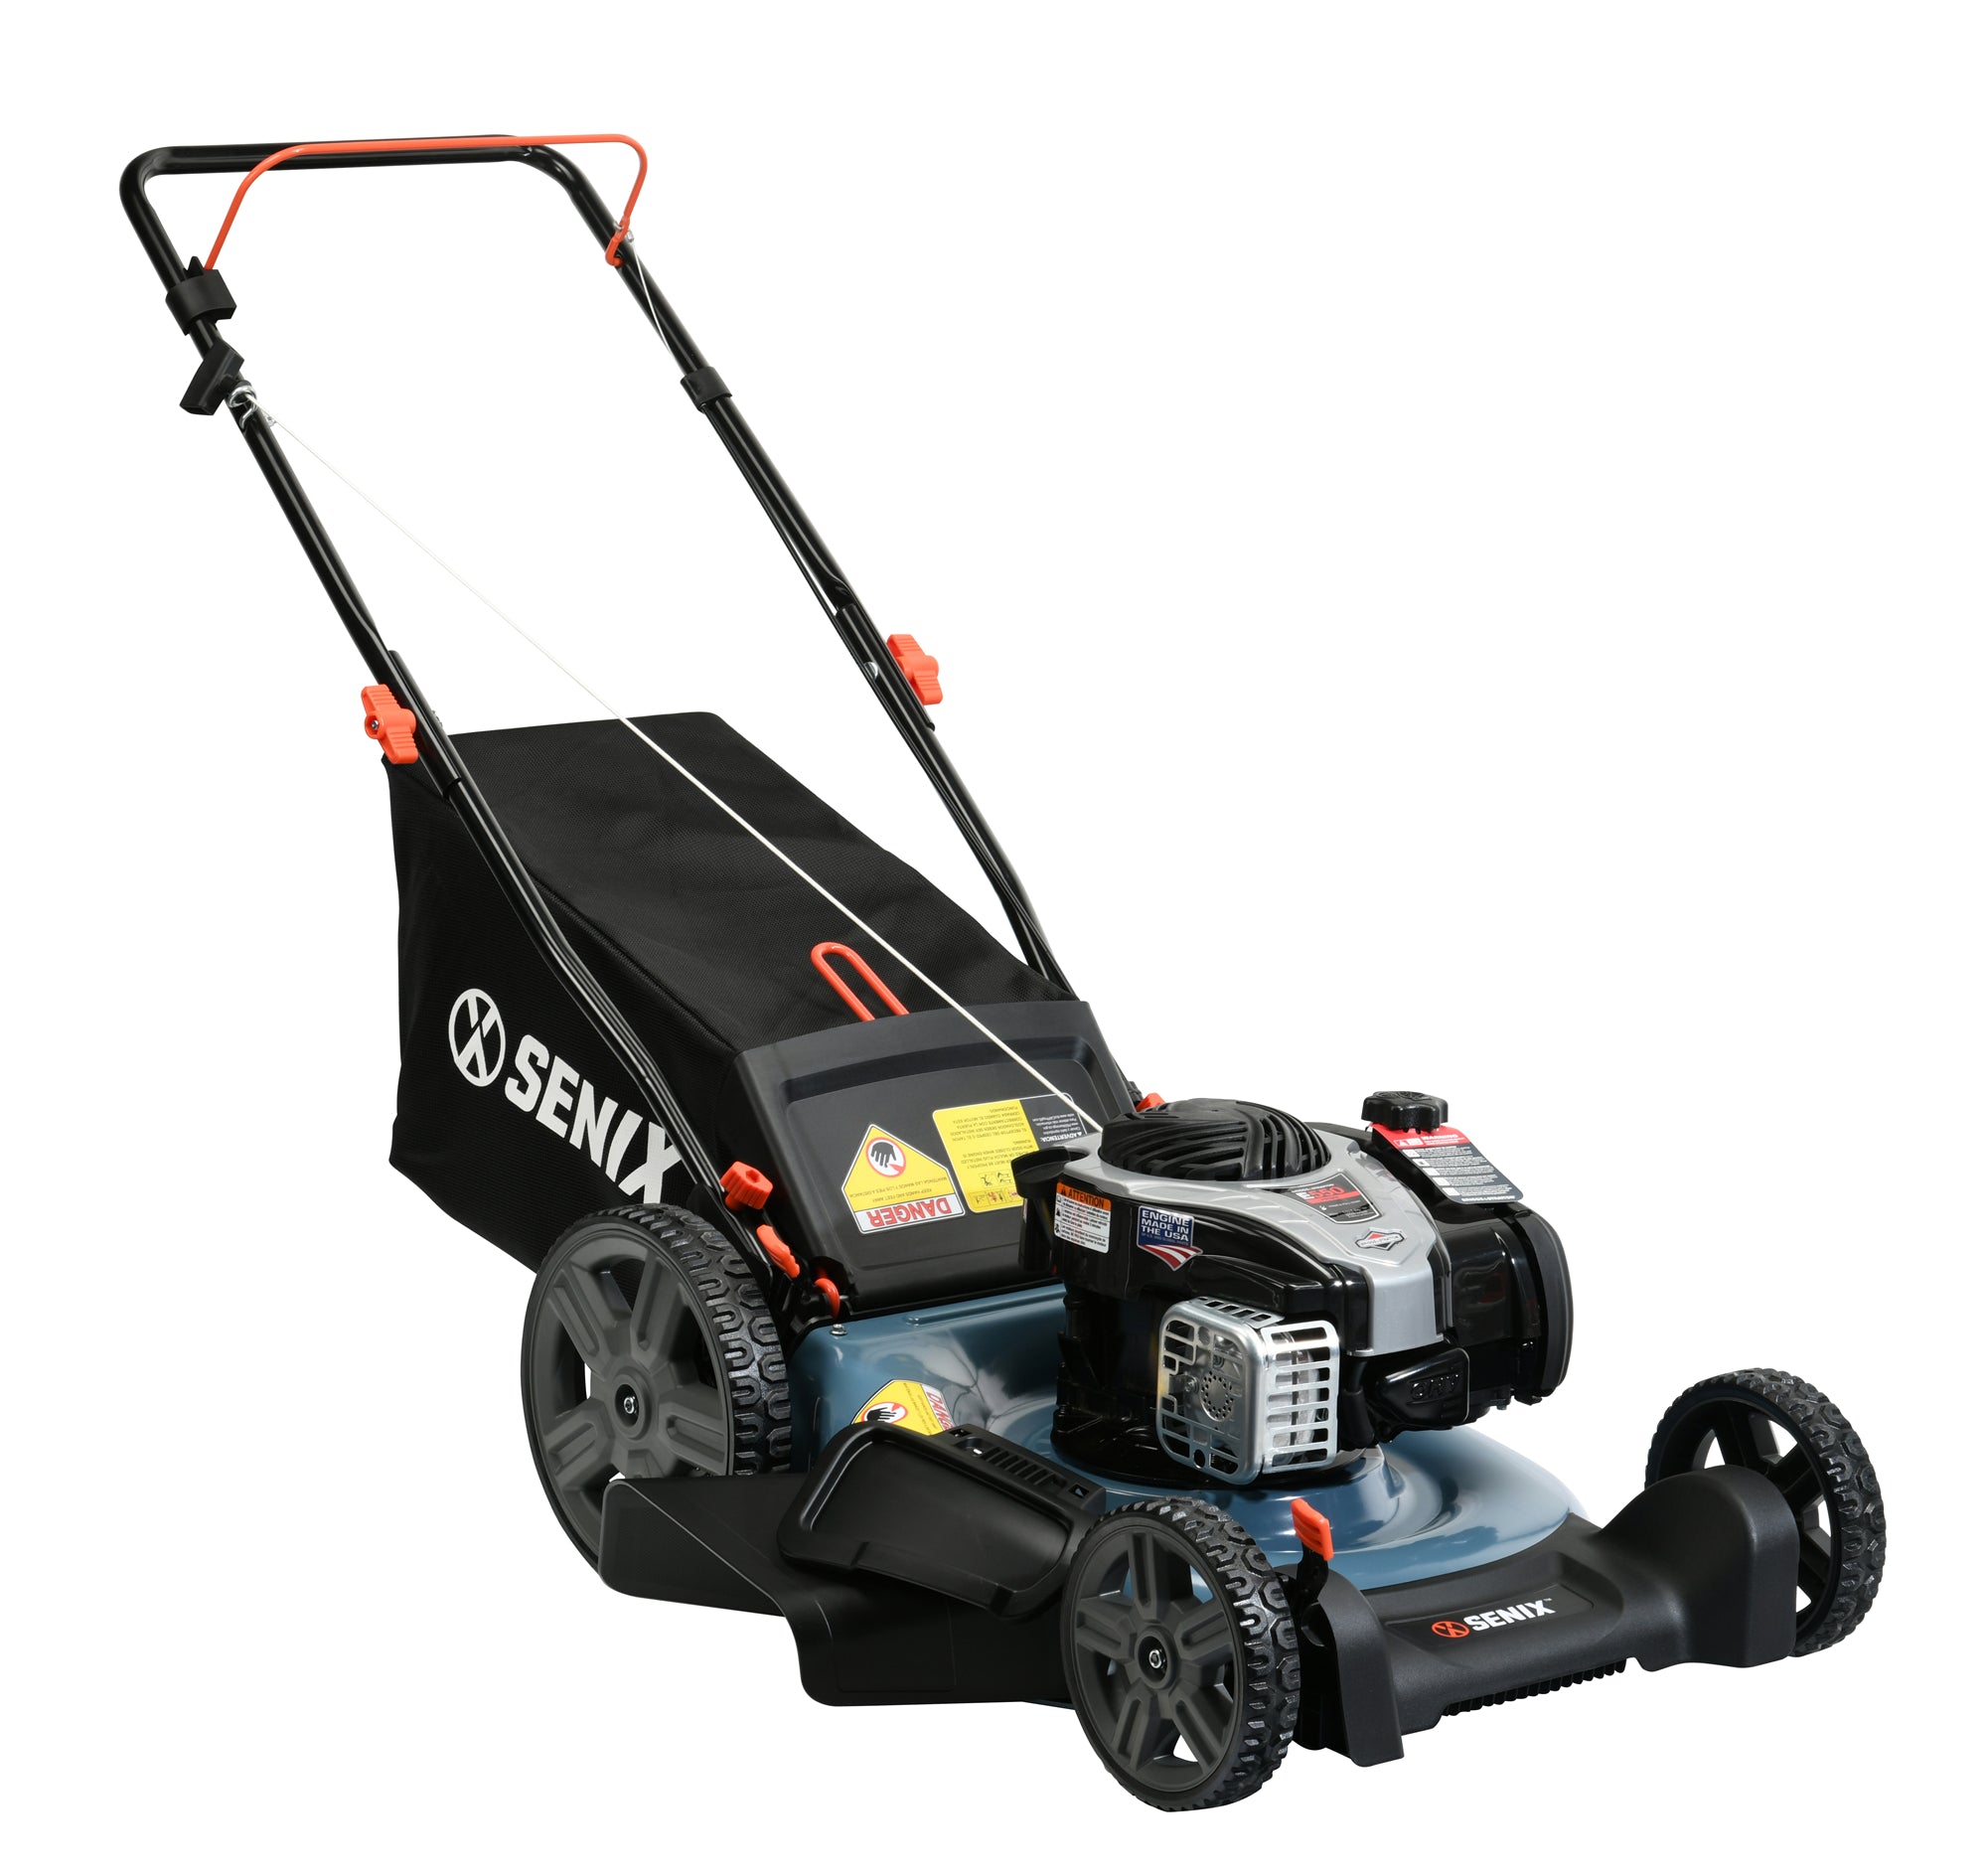  BLACK+DECKER 3-in-1 Lawn Mower, String Trimmer and